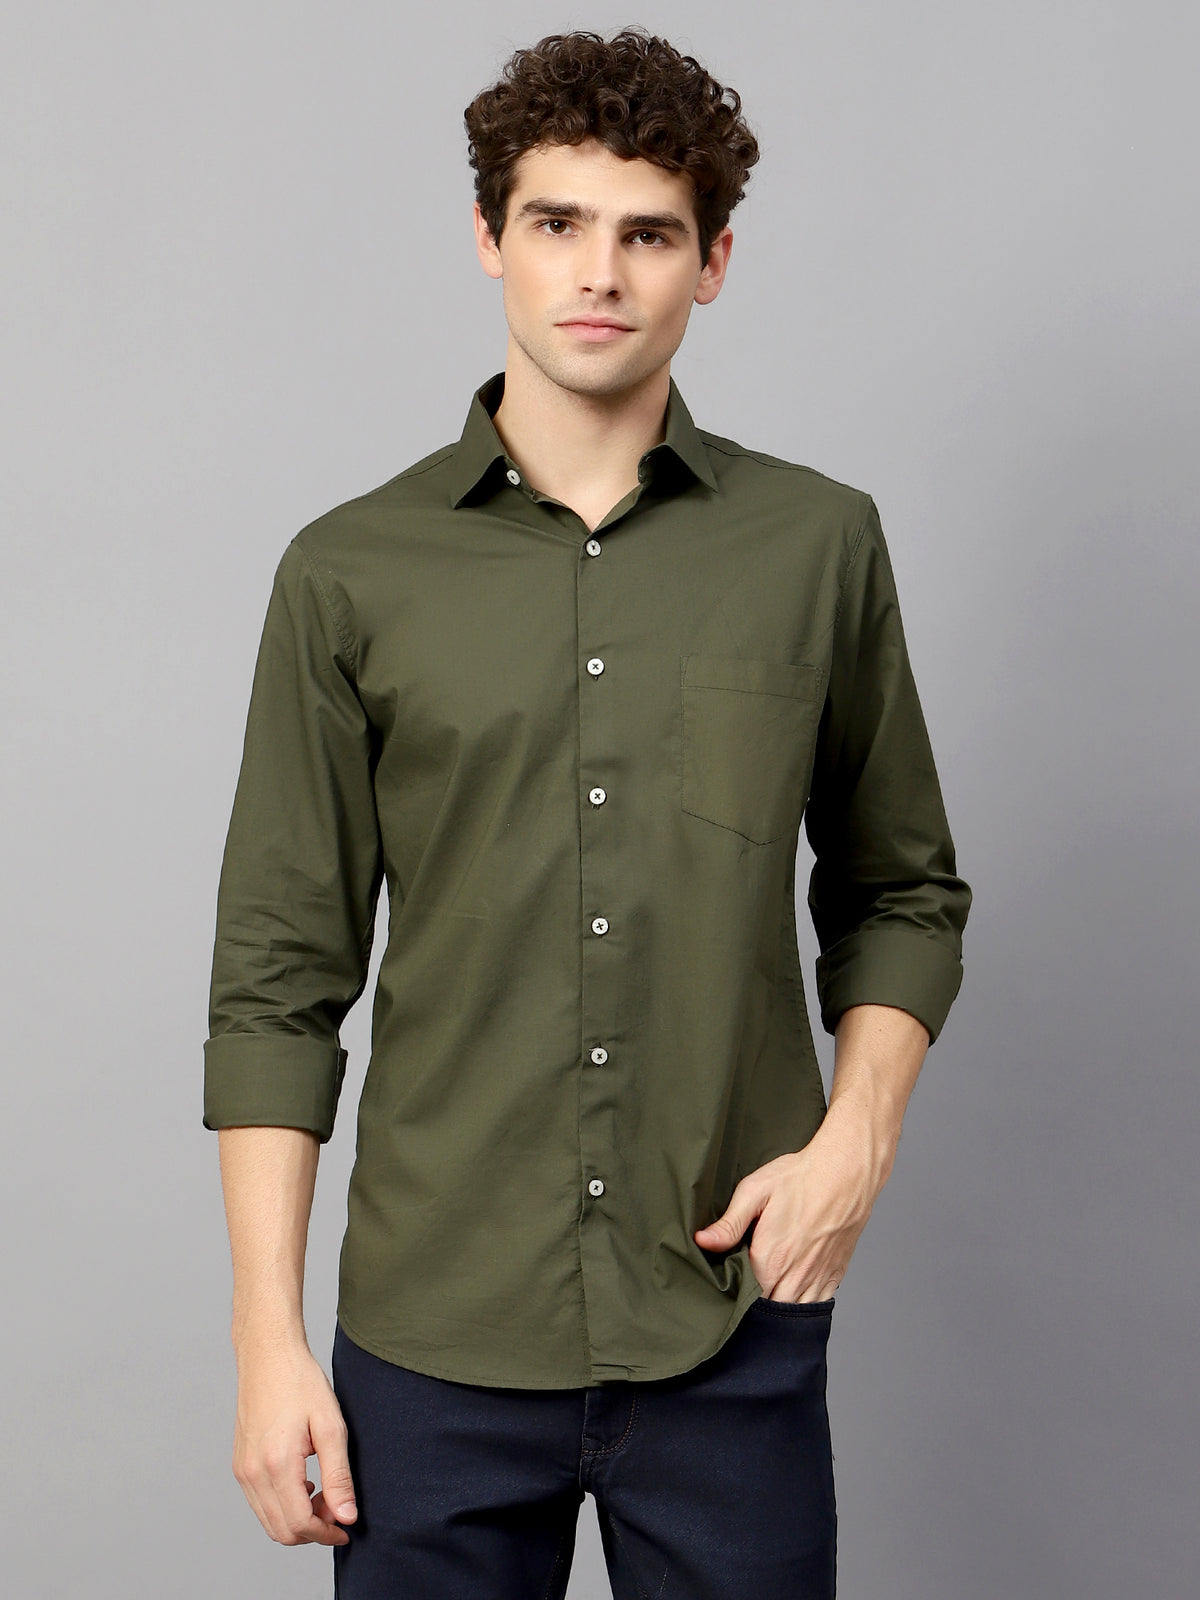 AMSWAN OLIVE GREEN ATHLEISURE SHIRTS WITH PREMIUM COTTON LYCRA BLEND